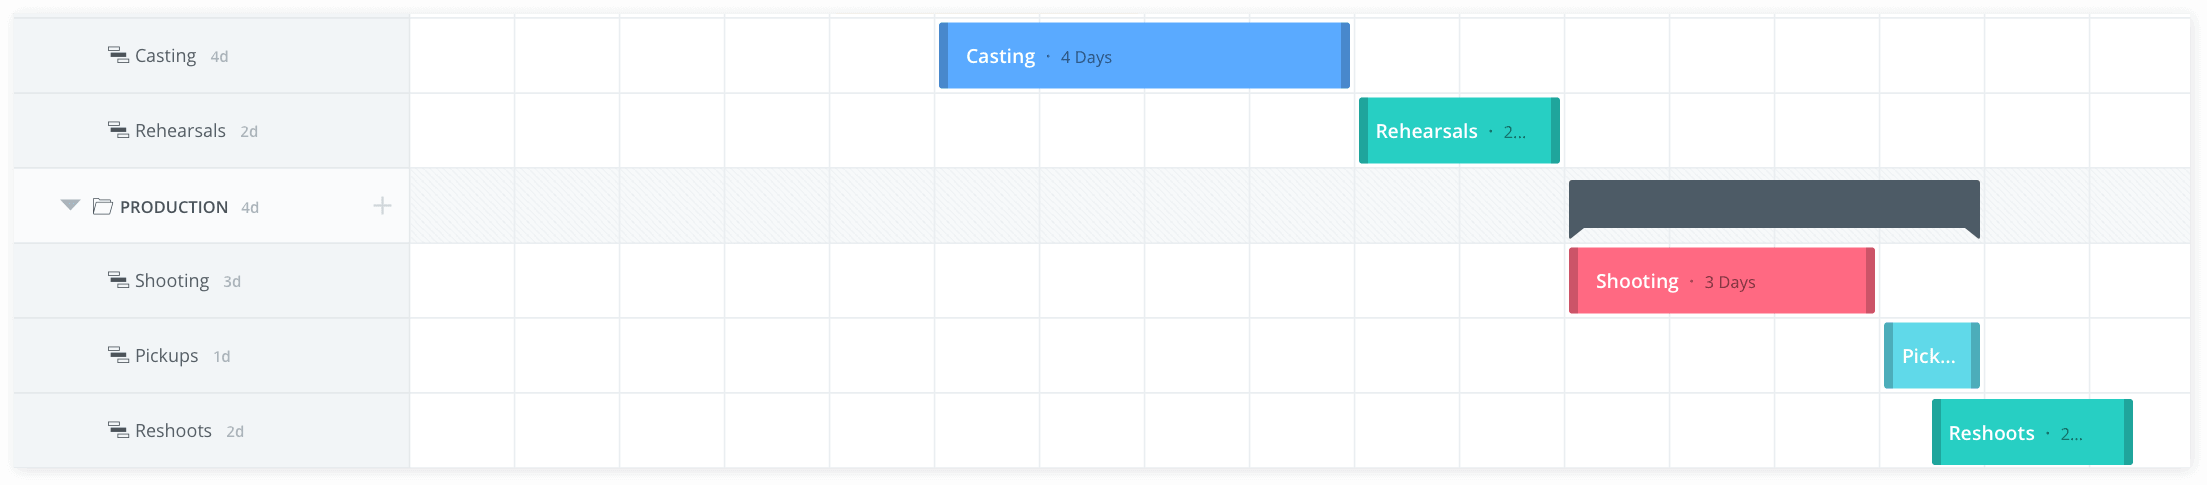 The Ultimate Guide to an Effective Production Calendar - Production Process